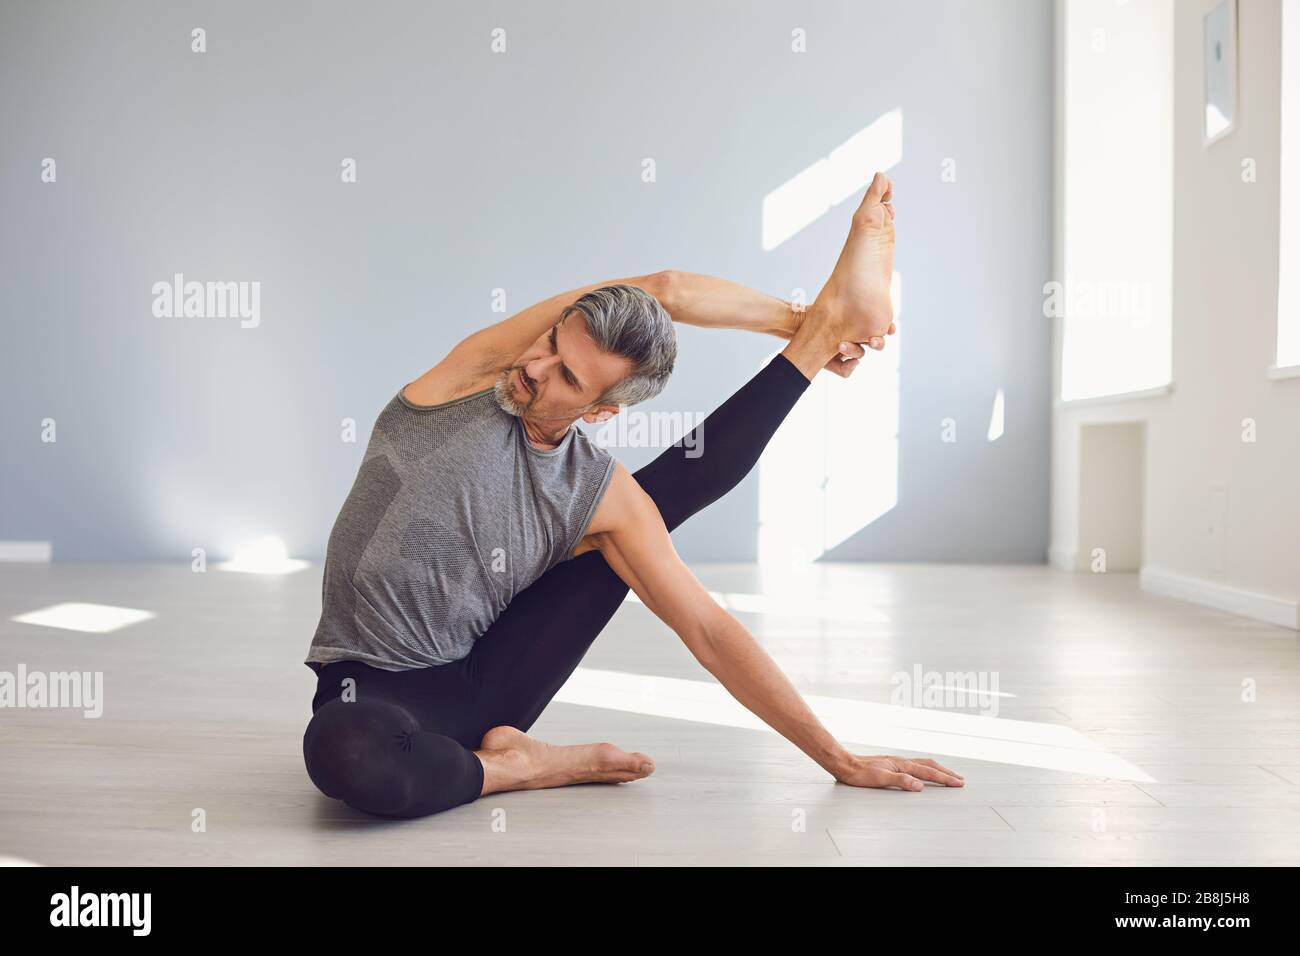 Yoga man. A man is practicing yoga balance in a gray room. Stock Photo